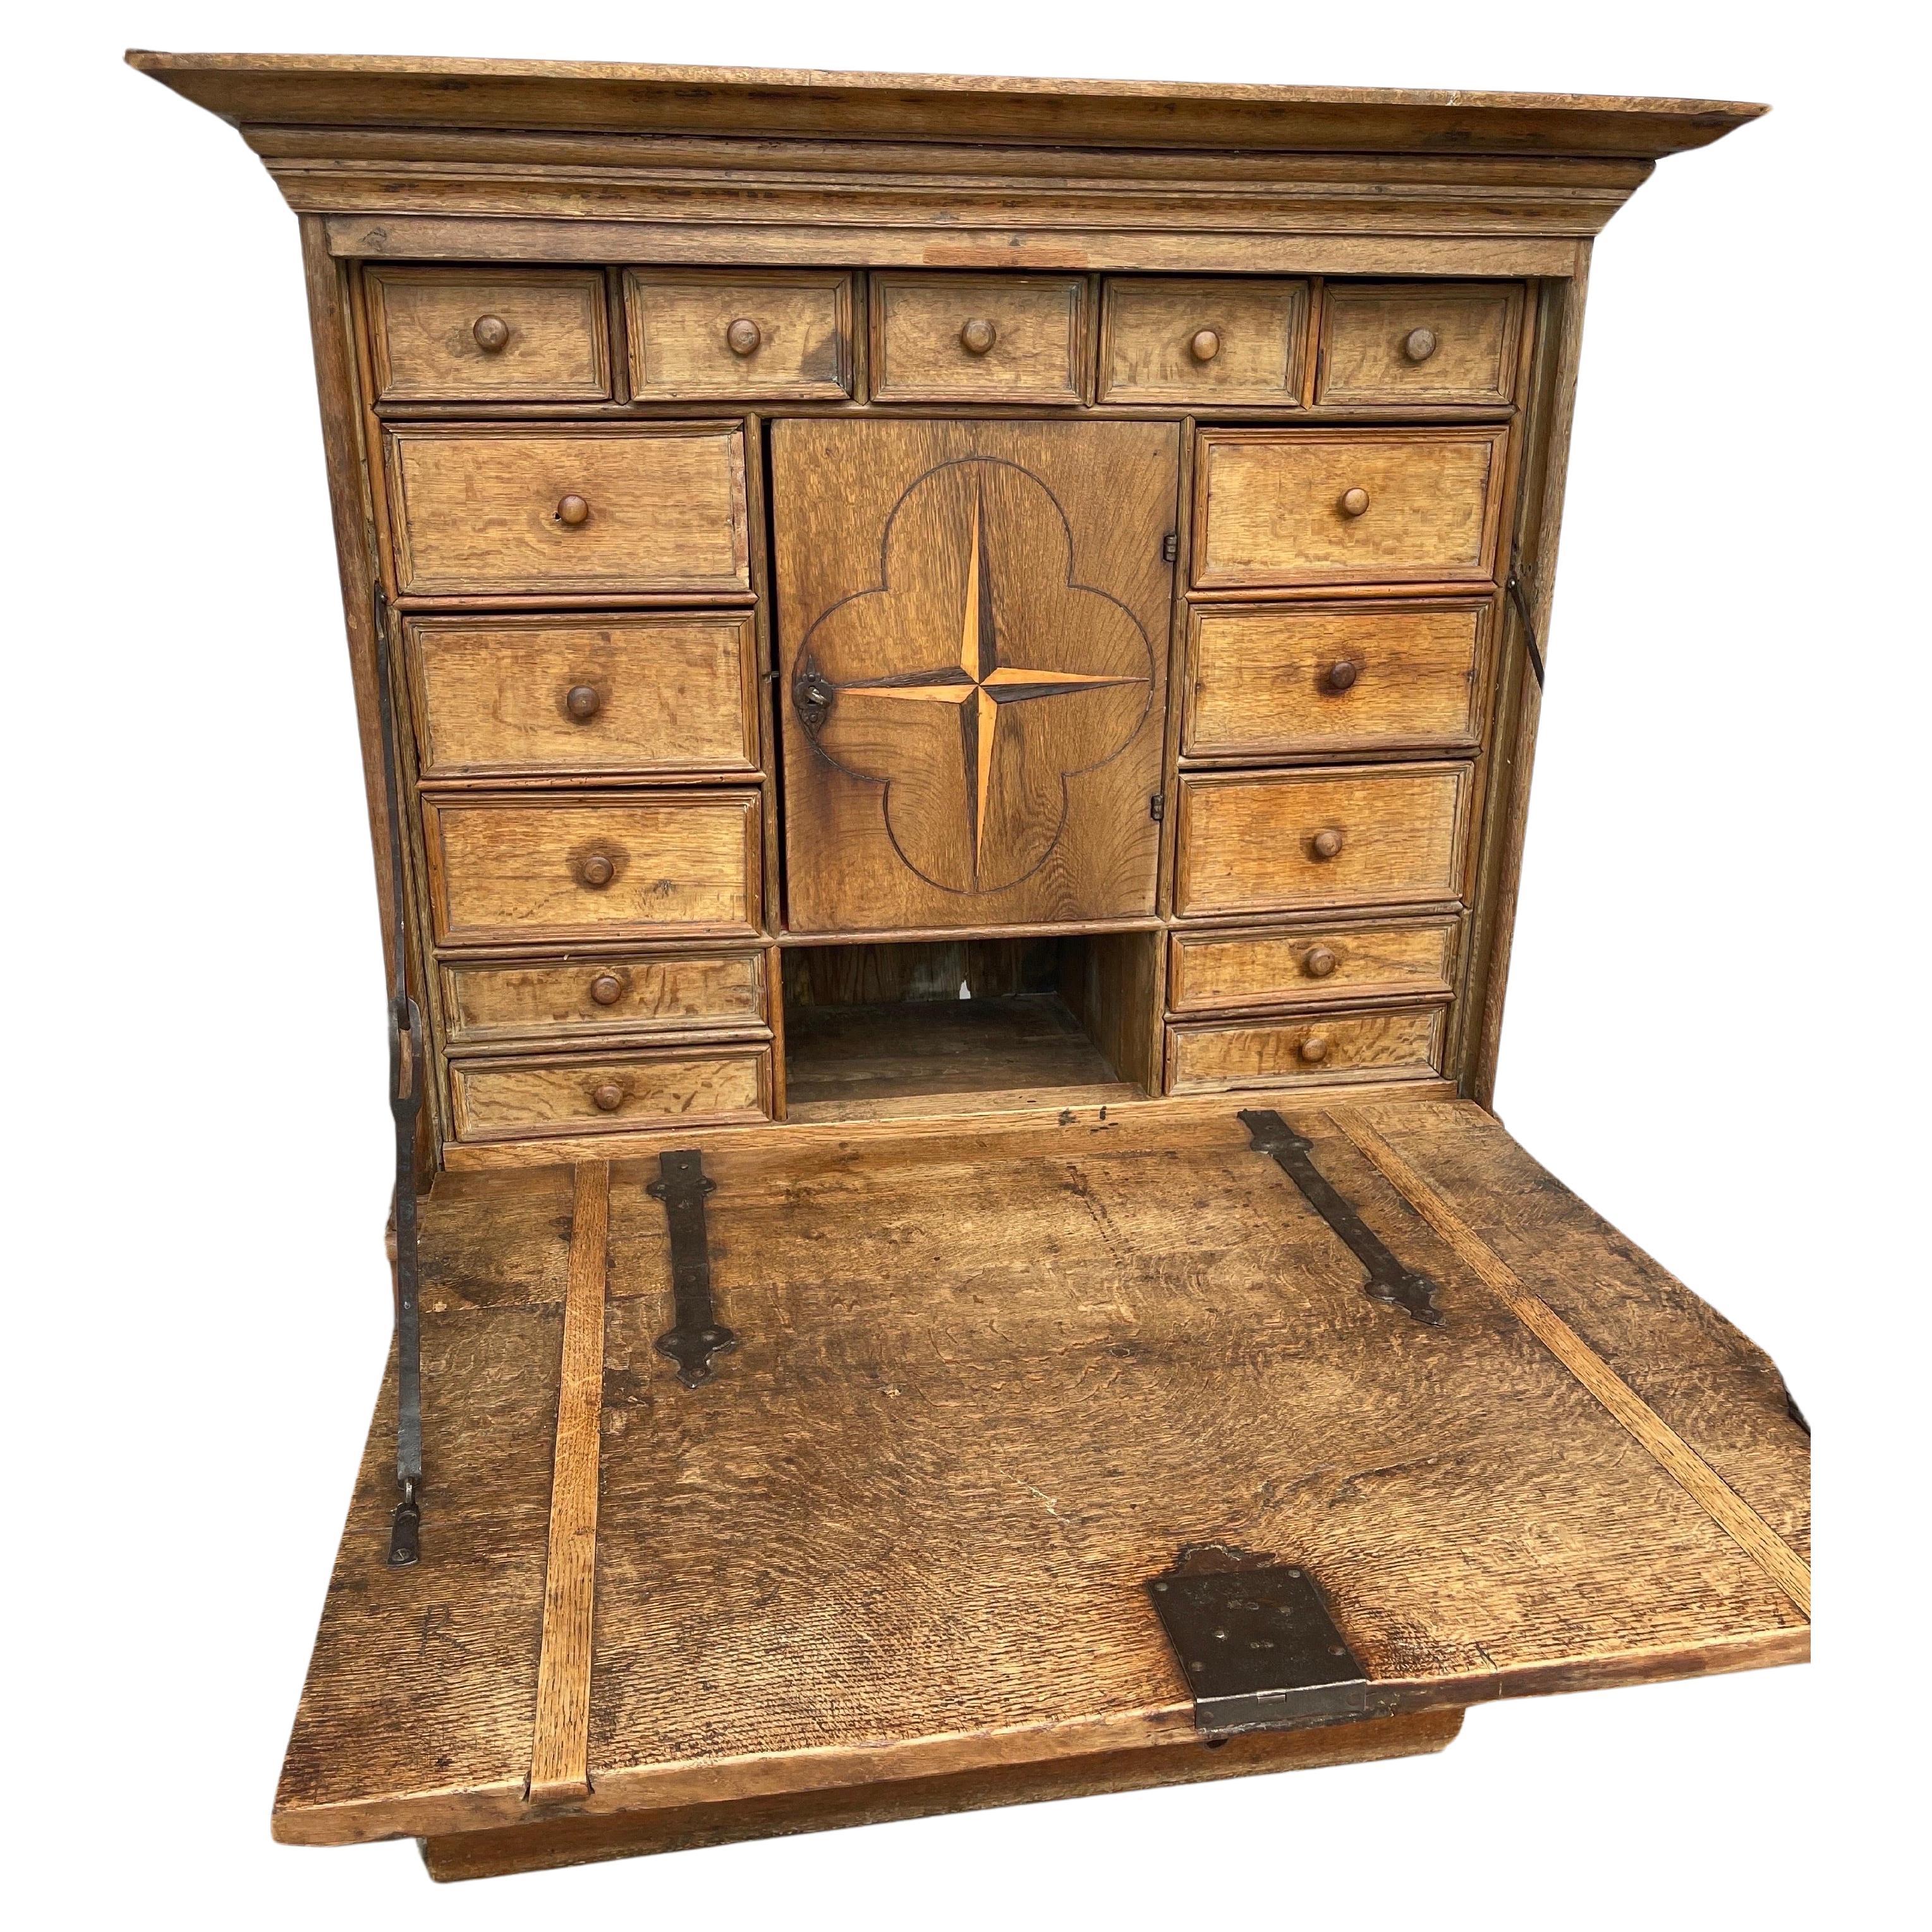 Baroque cabinet with pull down writing desk table top and interior drawers.
Both the exterior and the interior cabinet panels has the a four-pointed star  decor, representing the compass that keeps us on the right road, the path of peace. 